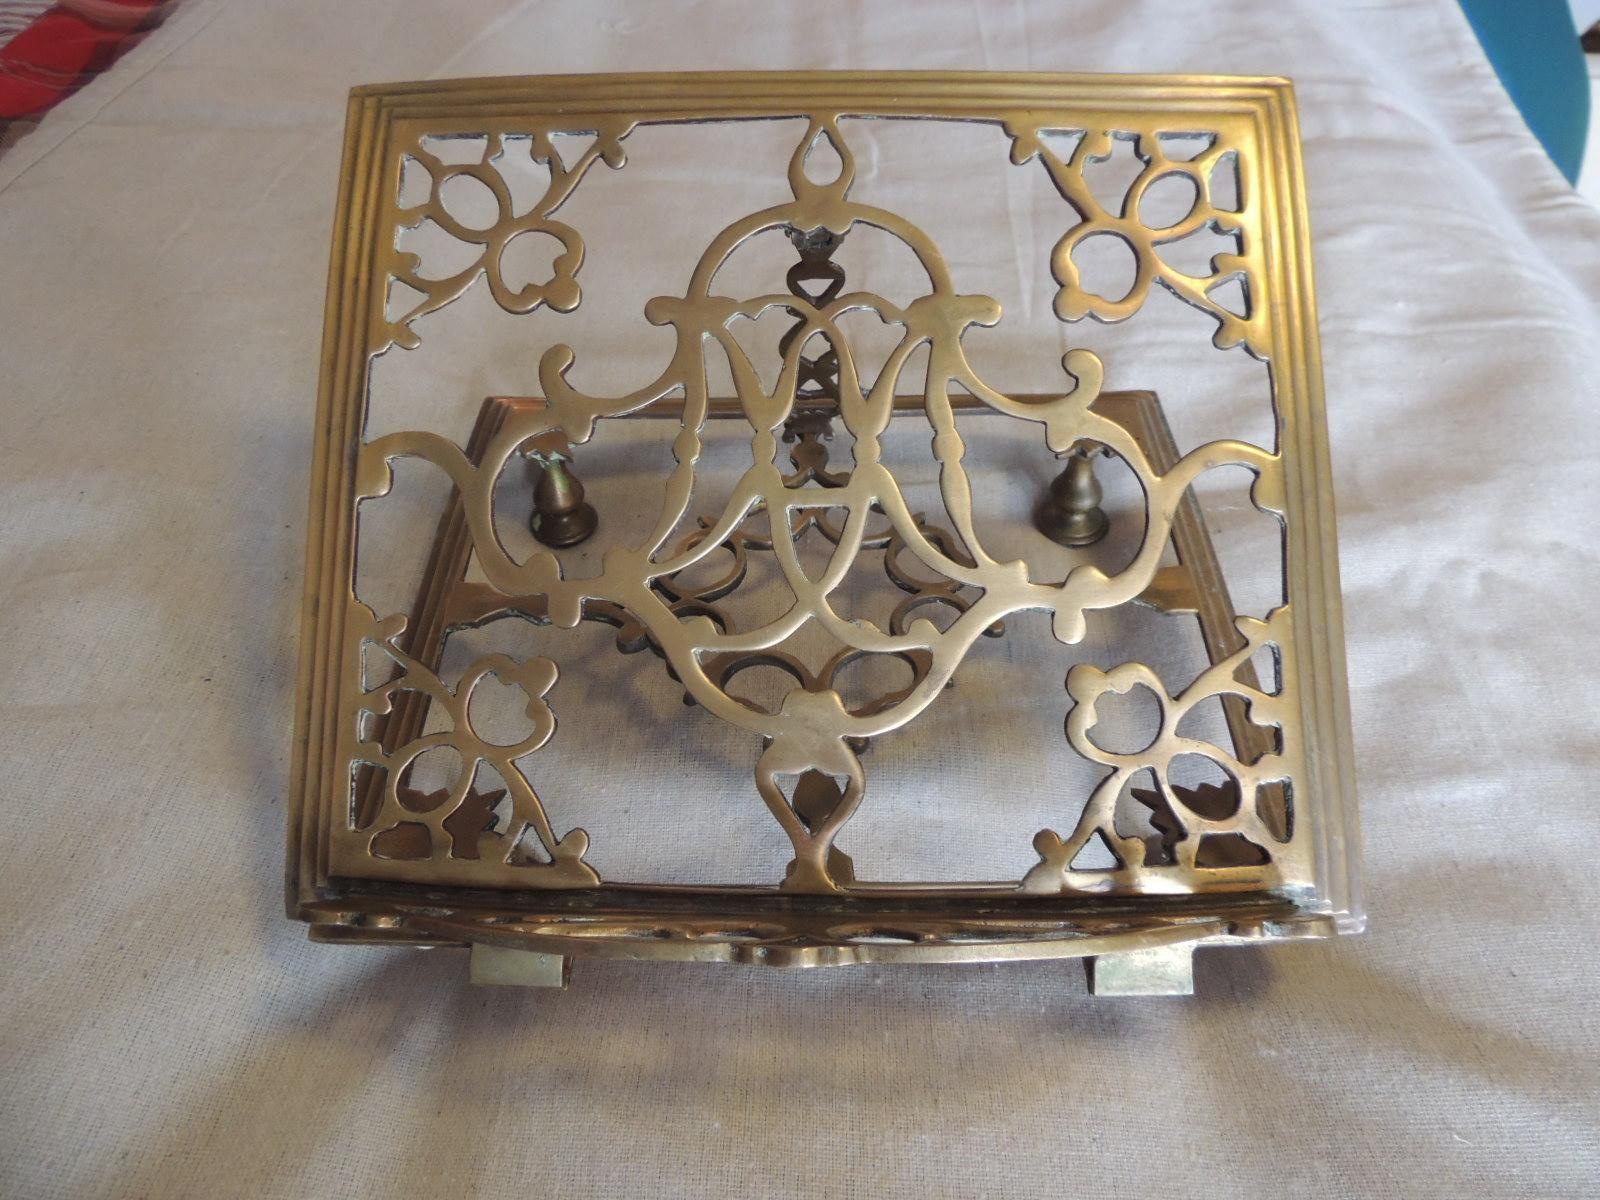 High Victorian Vintage Brass Ornate Book or Bible Stand with Small Round Feet